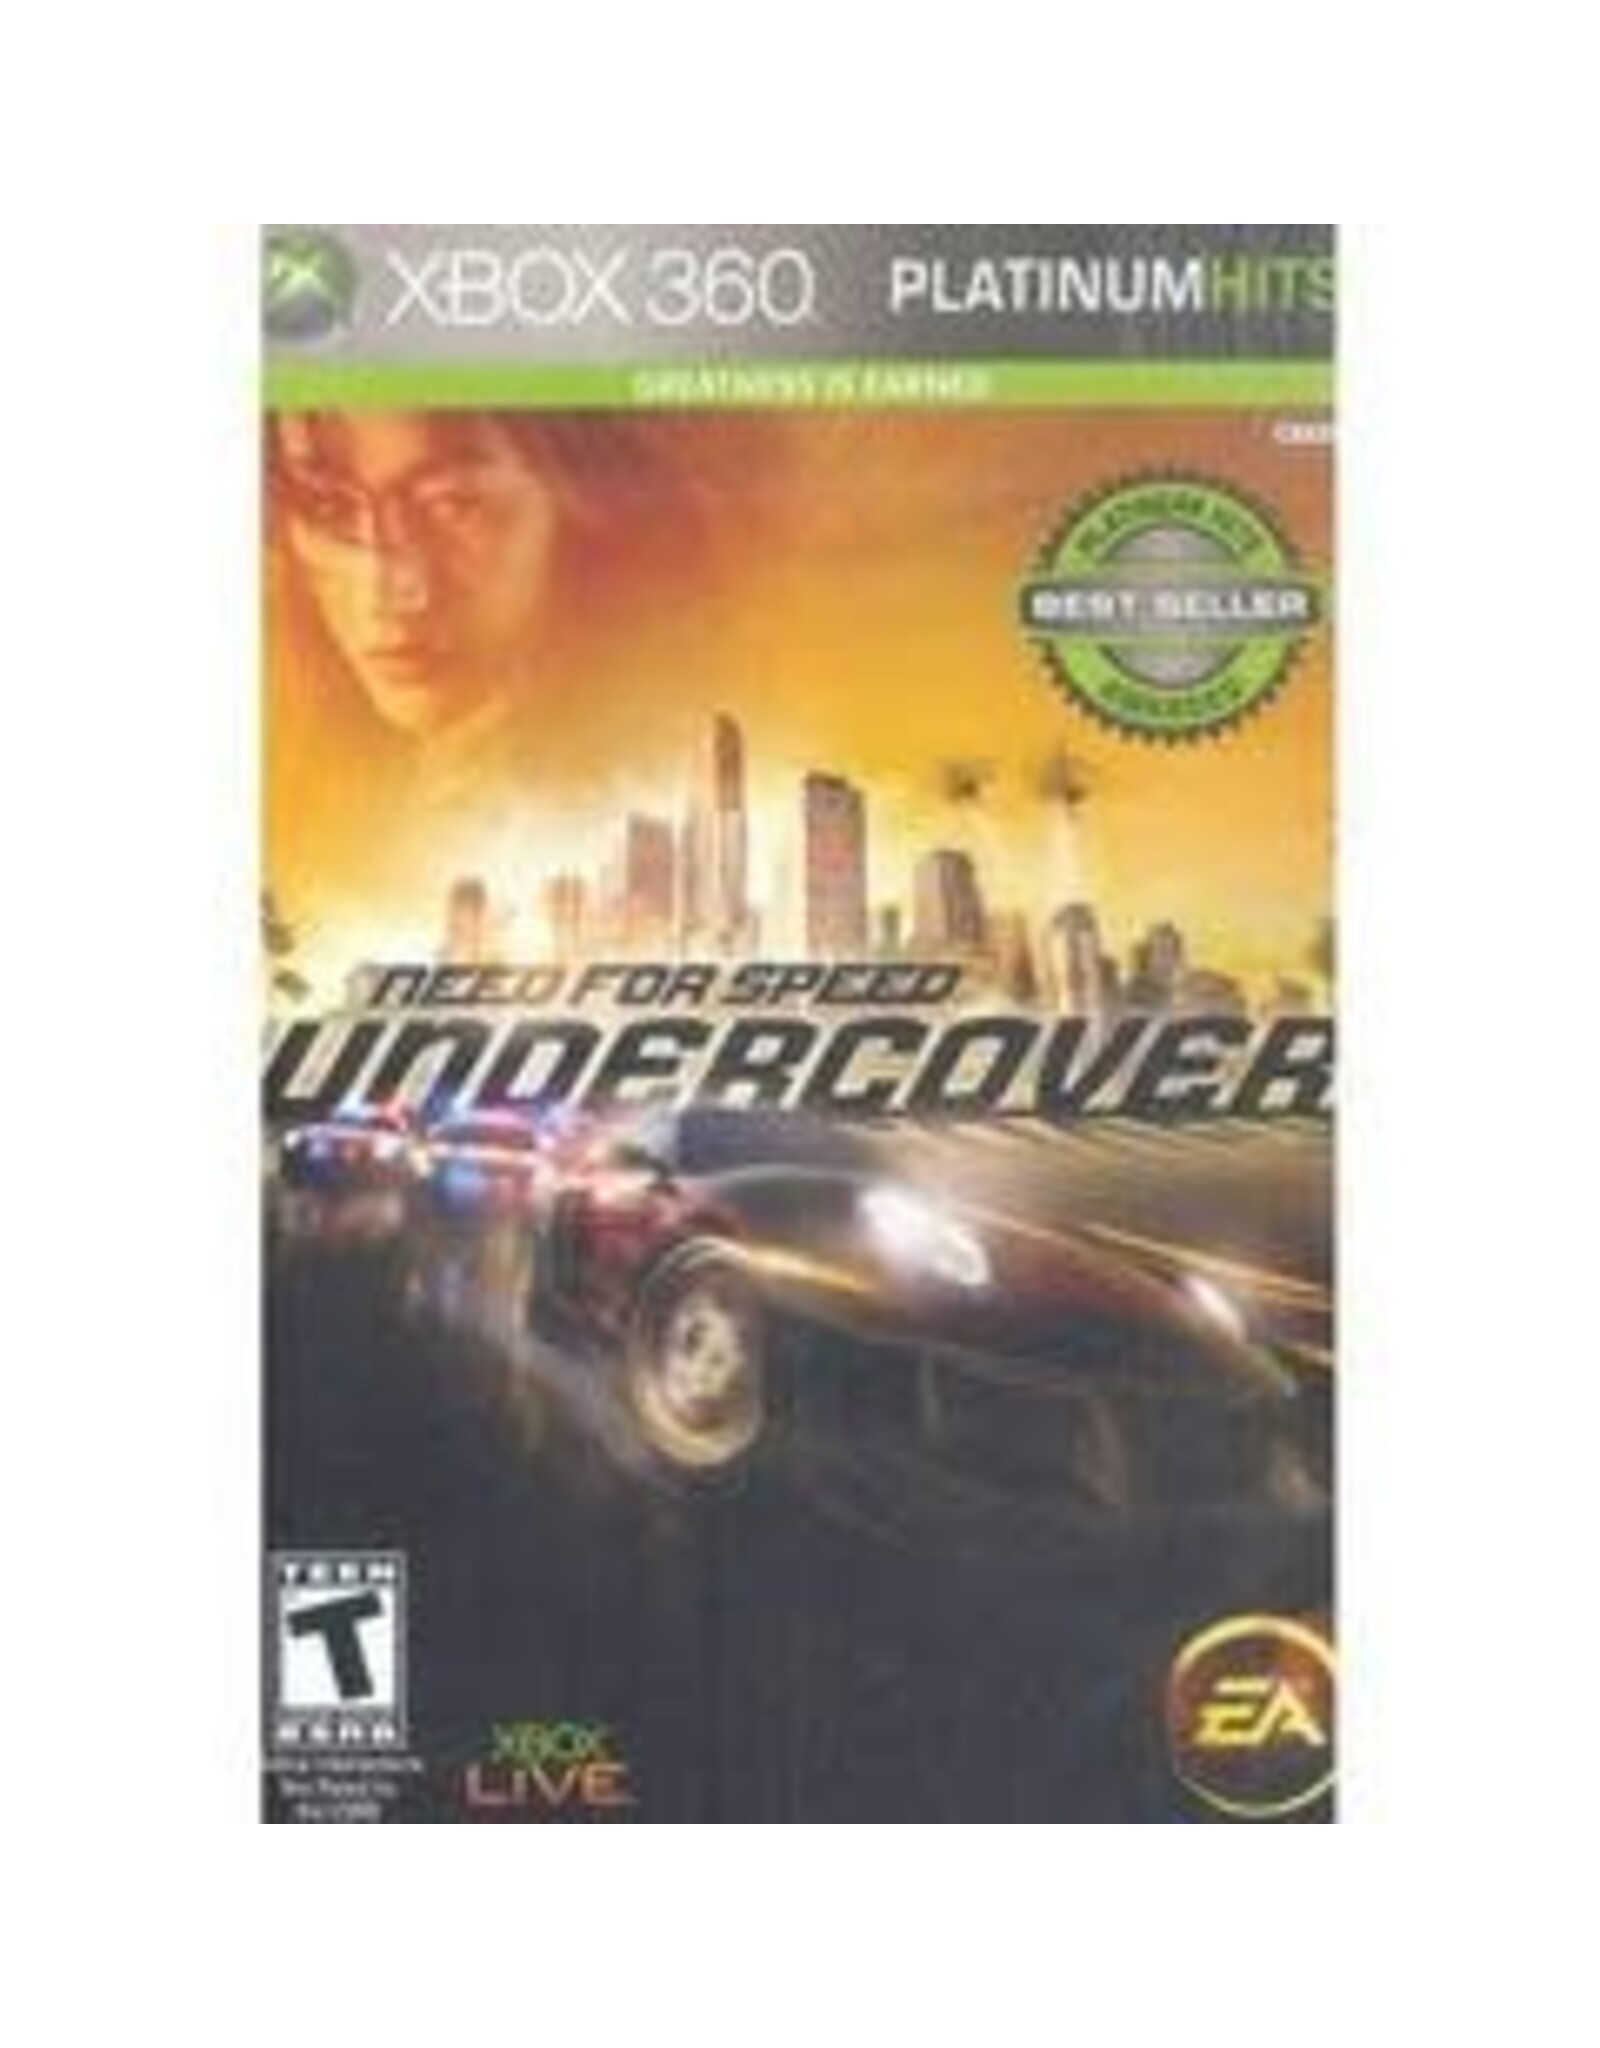 Xbox 360 Need for Speed Undercover (Platinum Hits, CiB)